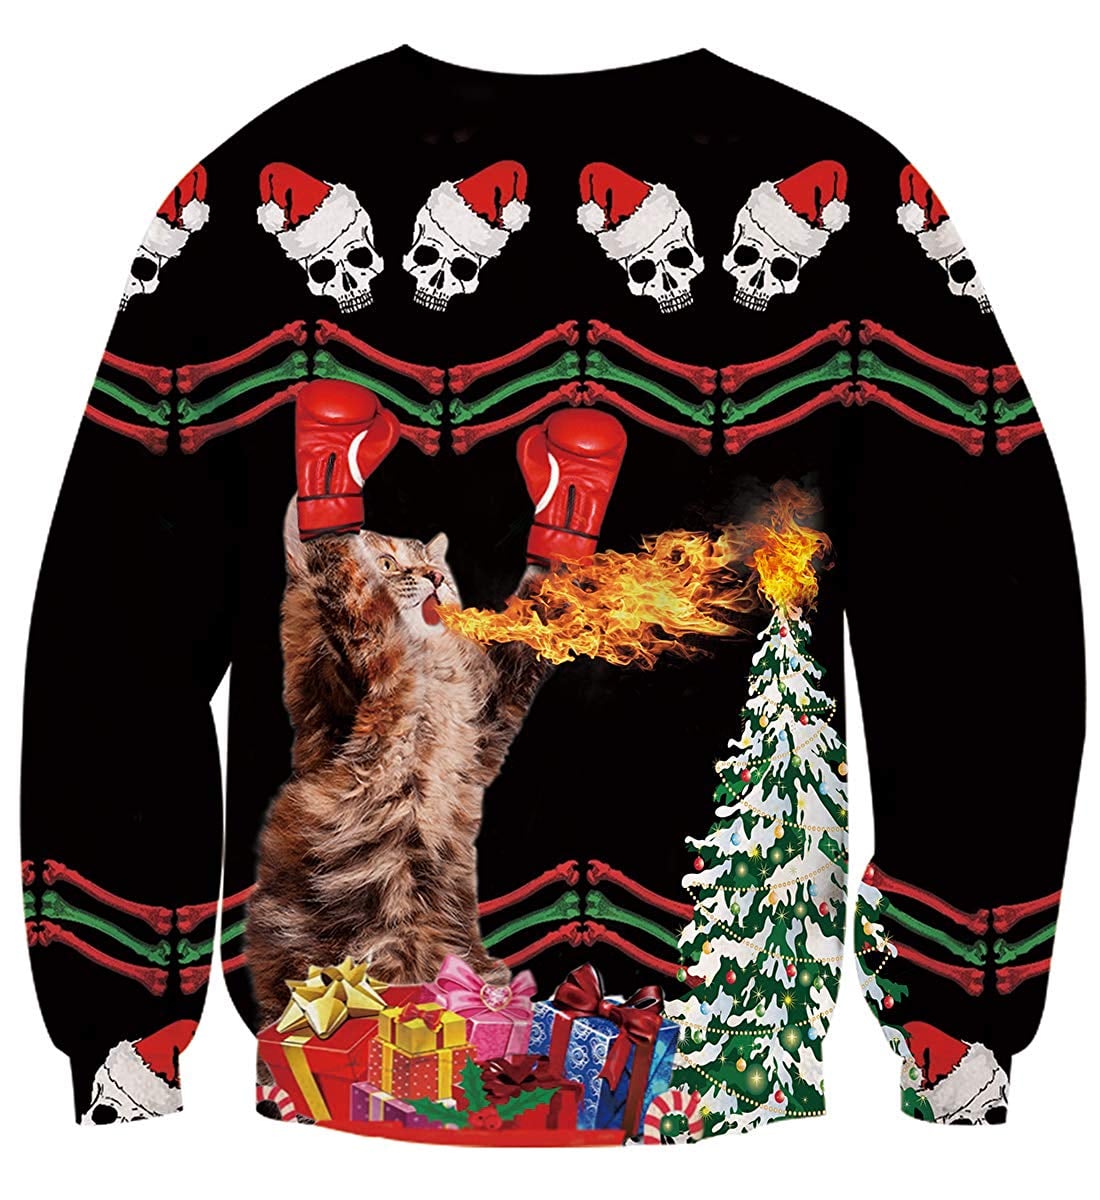 Cat-Themed Ugly Christmas Sweaters On - AOP Sweater - Black